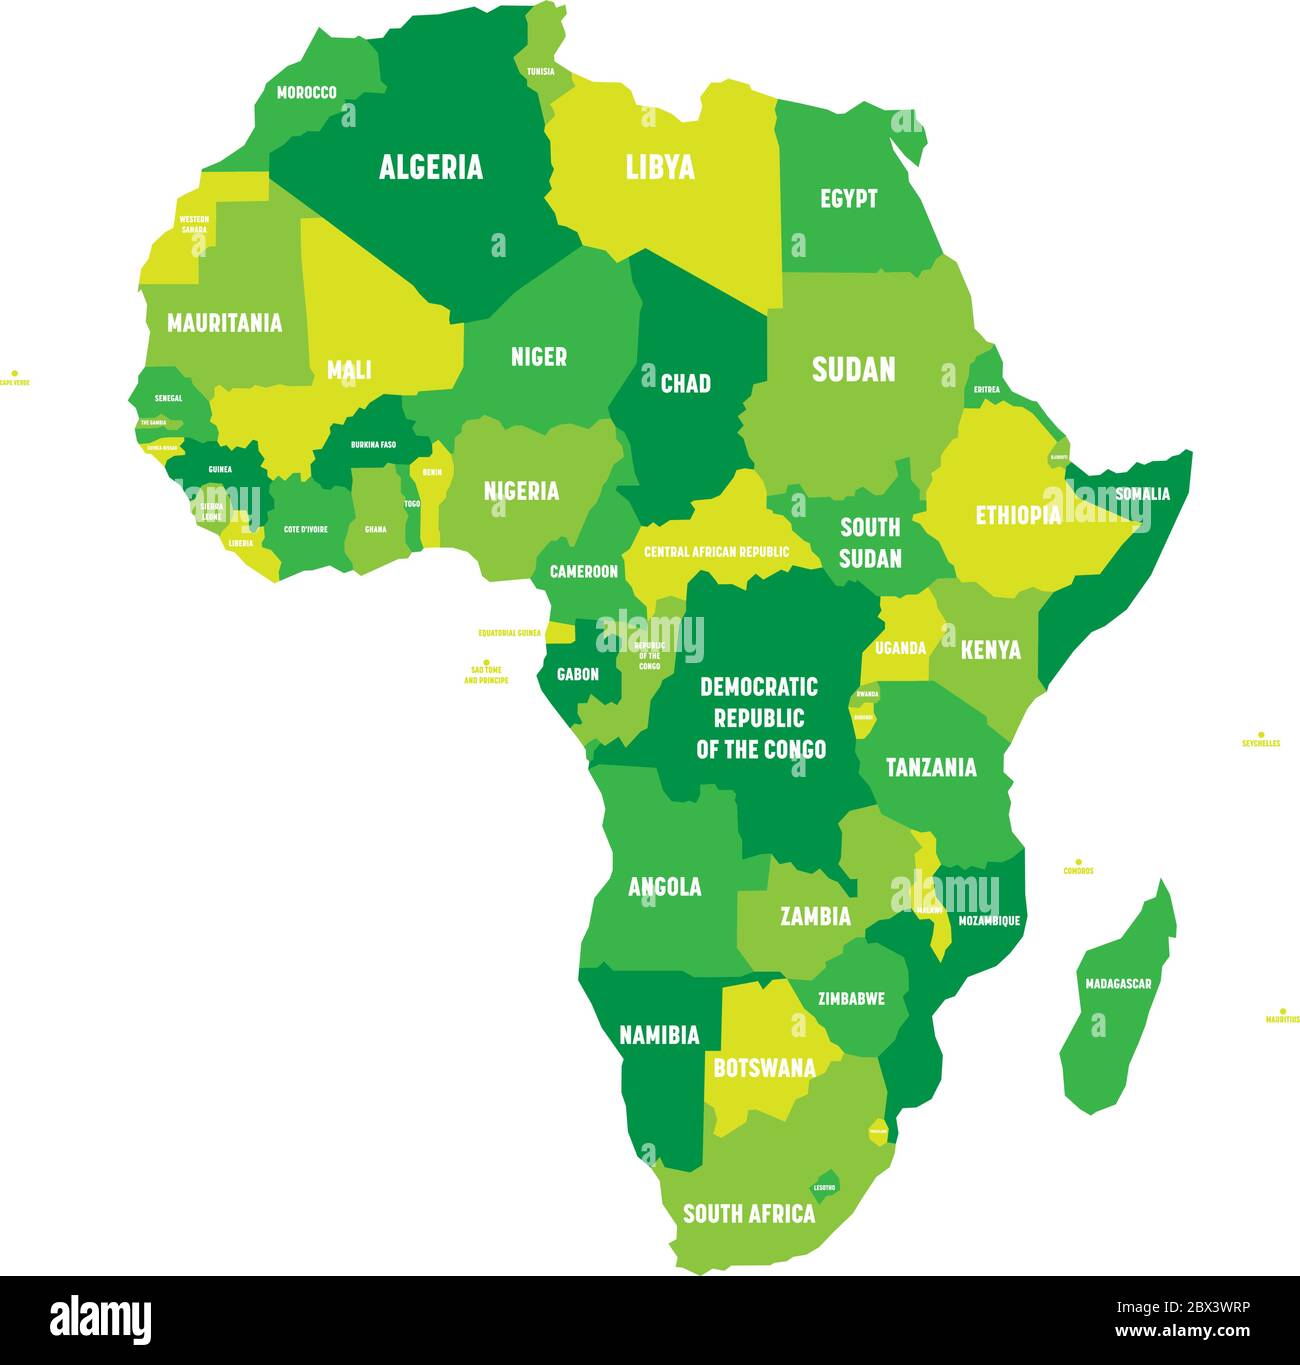 maps-of-africa-and-african-countries-political-maps-administrative